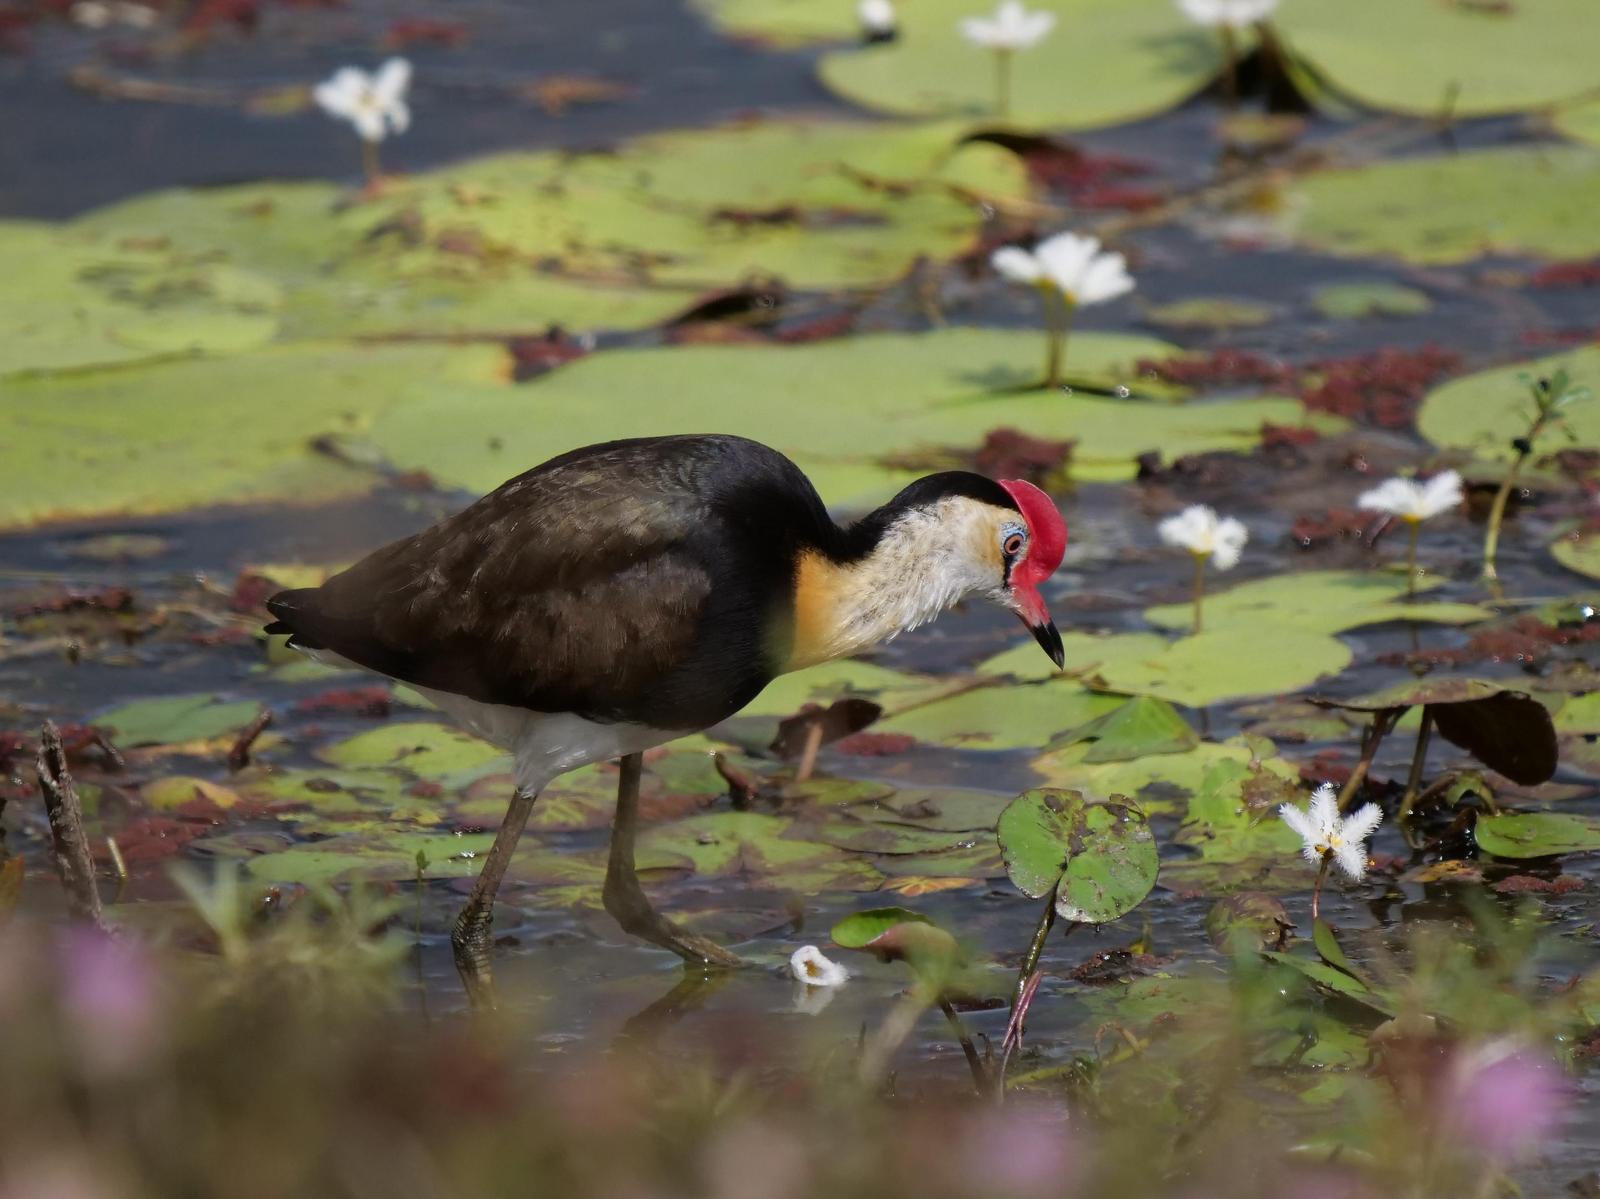 Comb-crested Jacana Photo by Peter Lowe